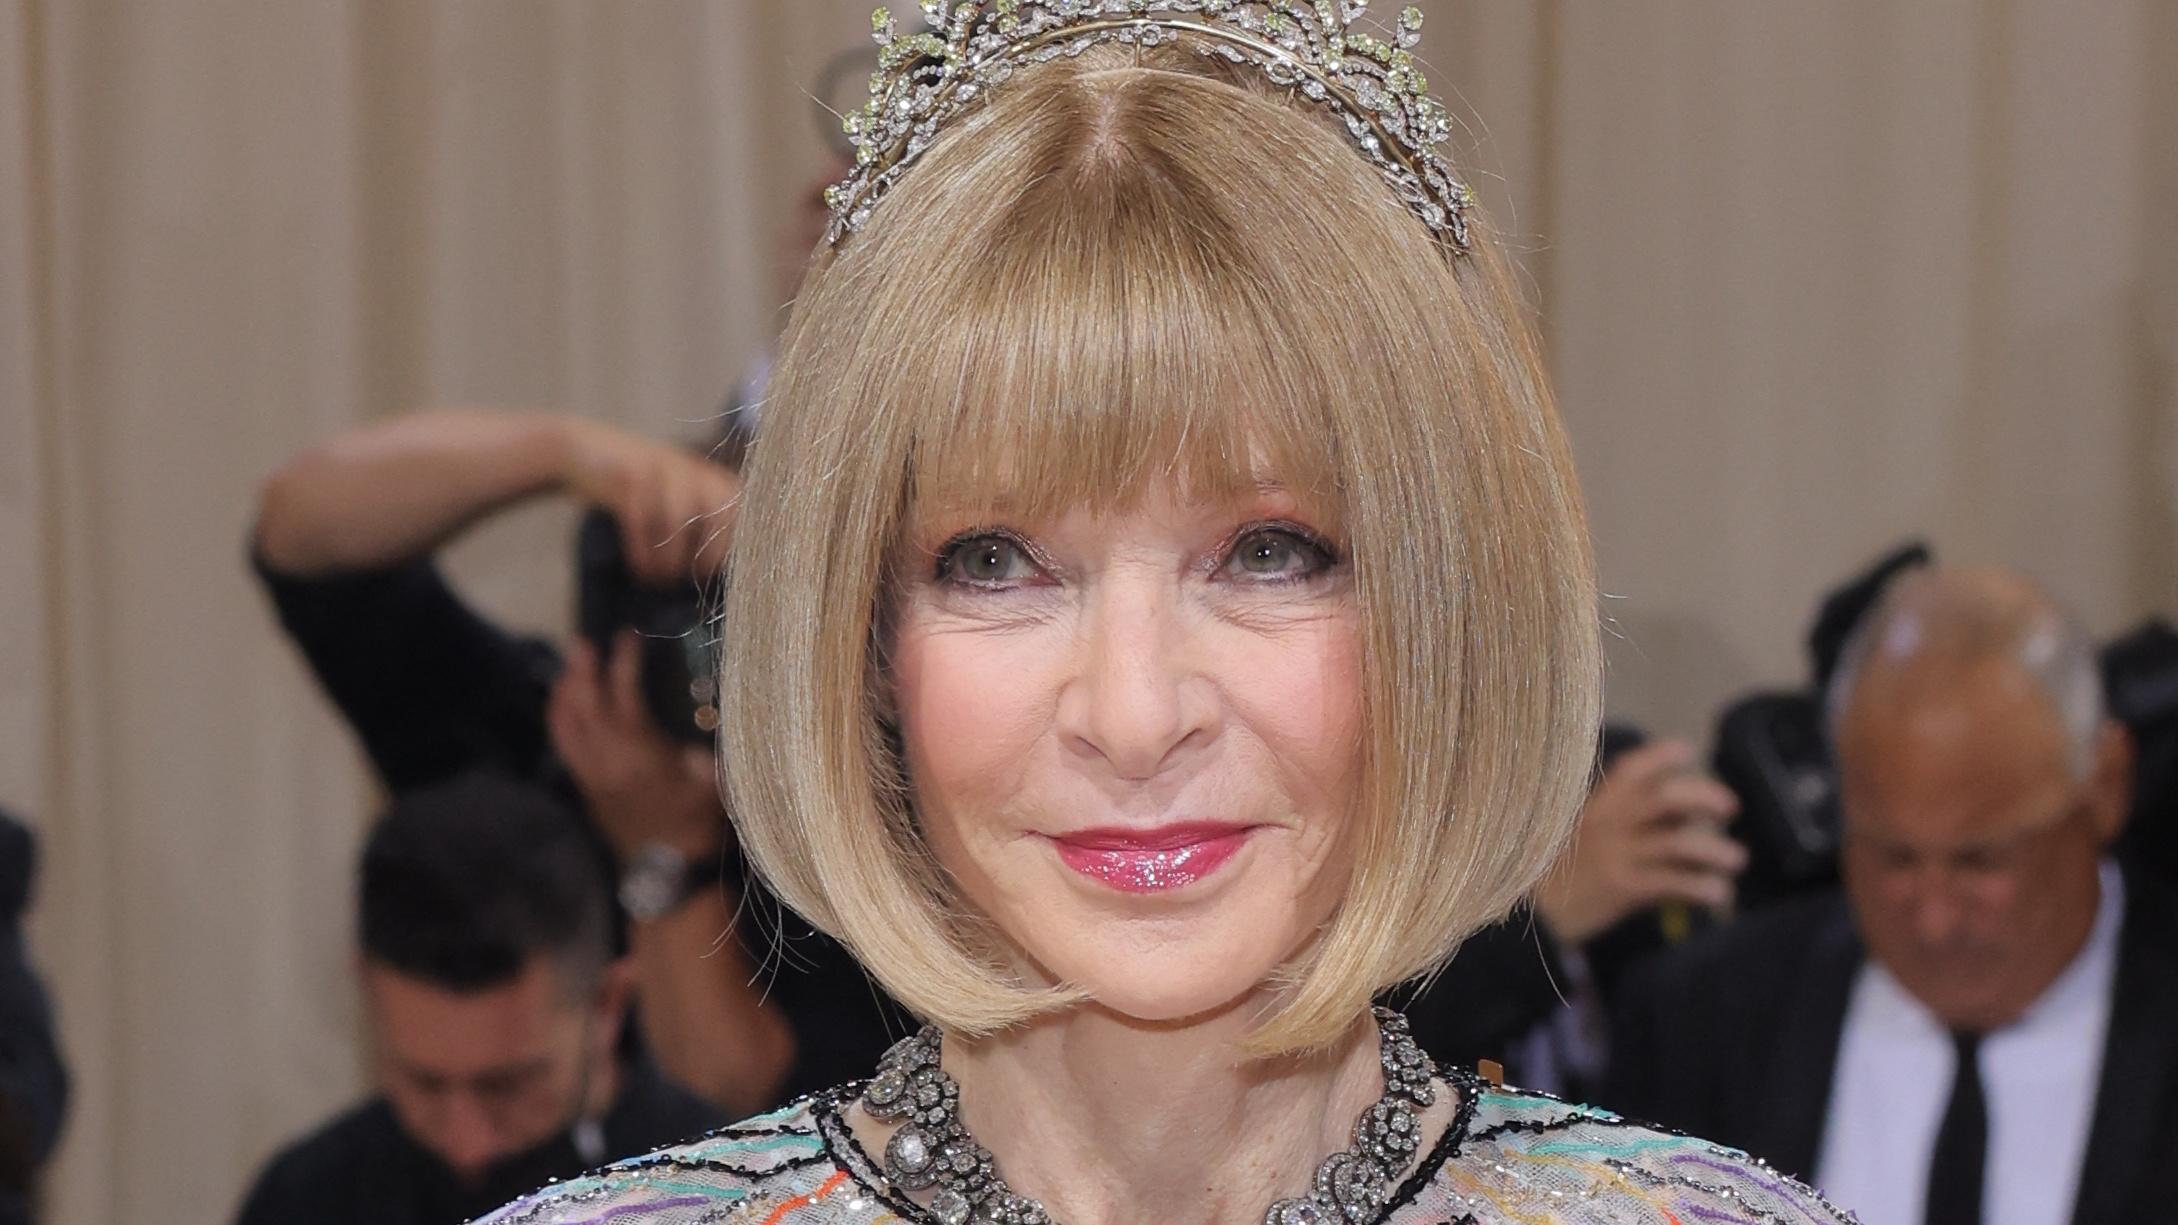 Anna Wintour arrives at the In America: An Anthology of Fashion themed Met Gala at the Metropolitan Museum of Art in New York City, New York, U.S., May 2, 2022. REUTERS/Andrew Kelly